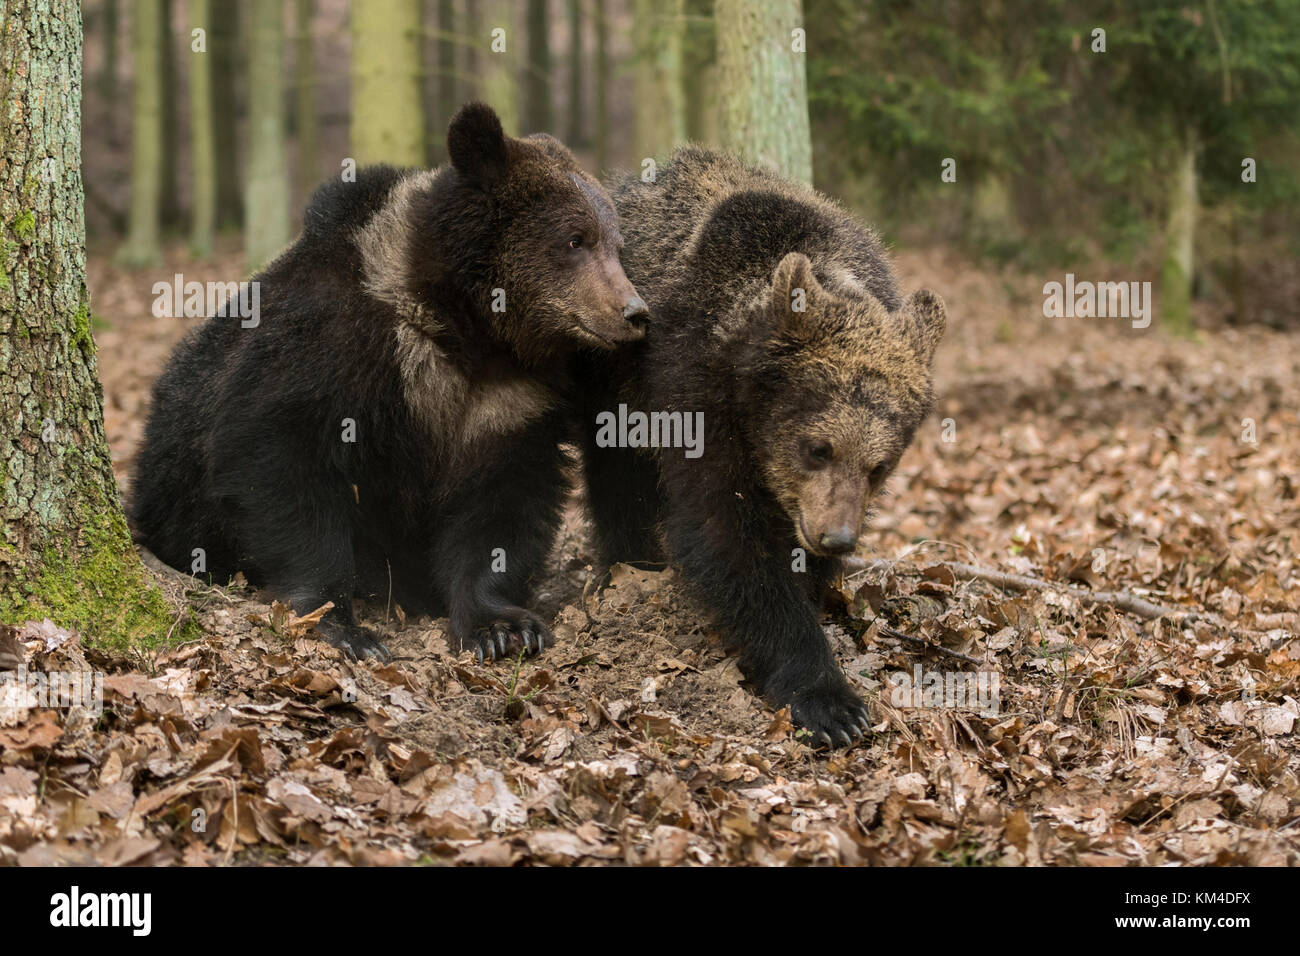 Brown Bears / Braunbaeren ( Ursus arctos ), two siblings, young, adolescent, playing together in an autumnal broadleaf forest, Europe. Stock Photo